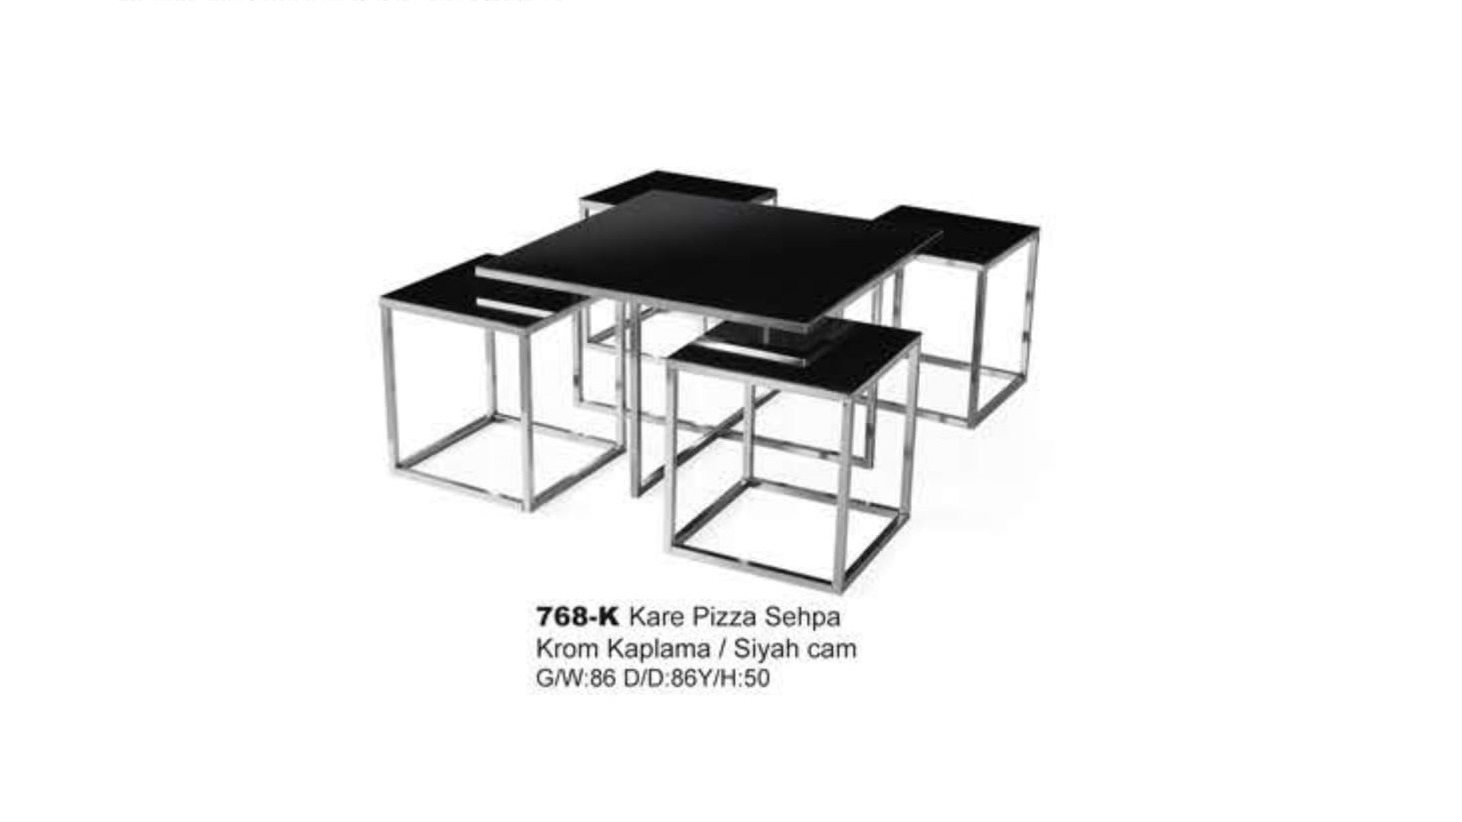 Square Pizza Center Table Chrome Plated Black Glass